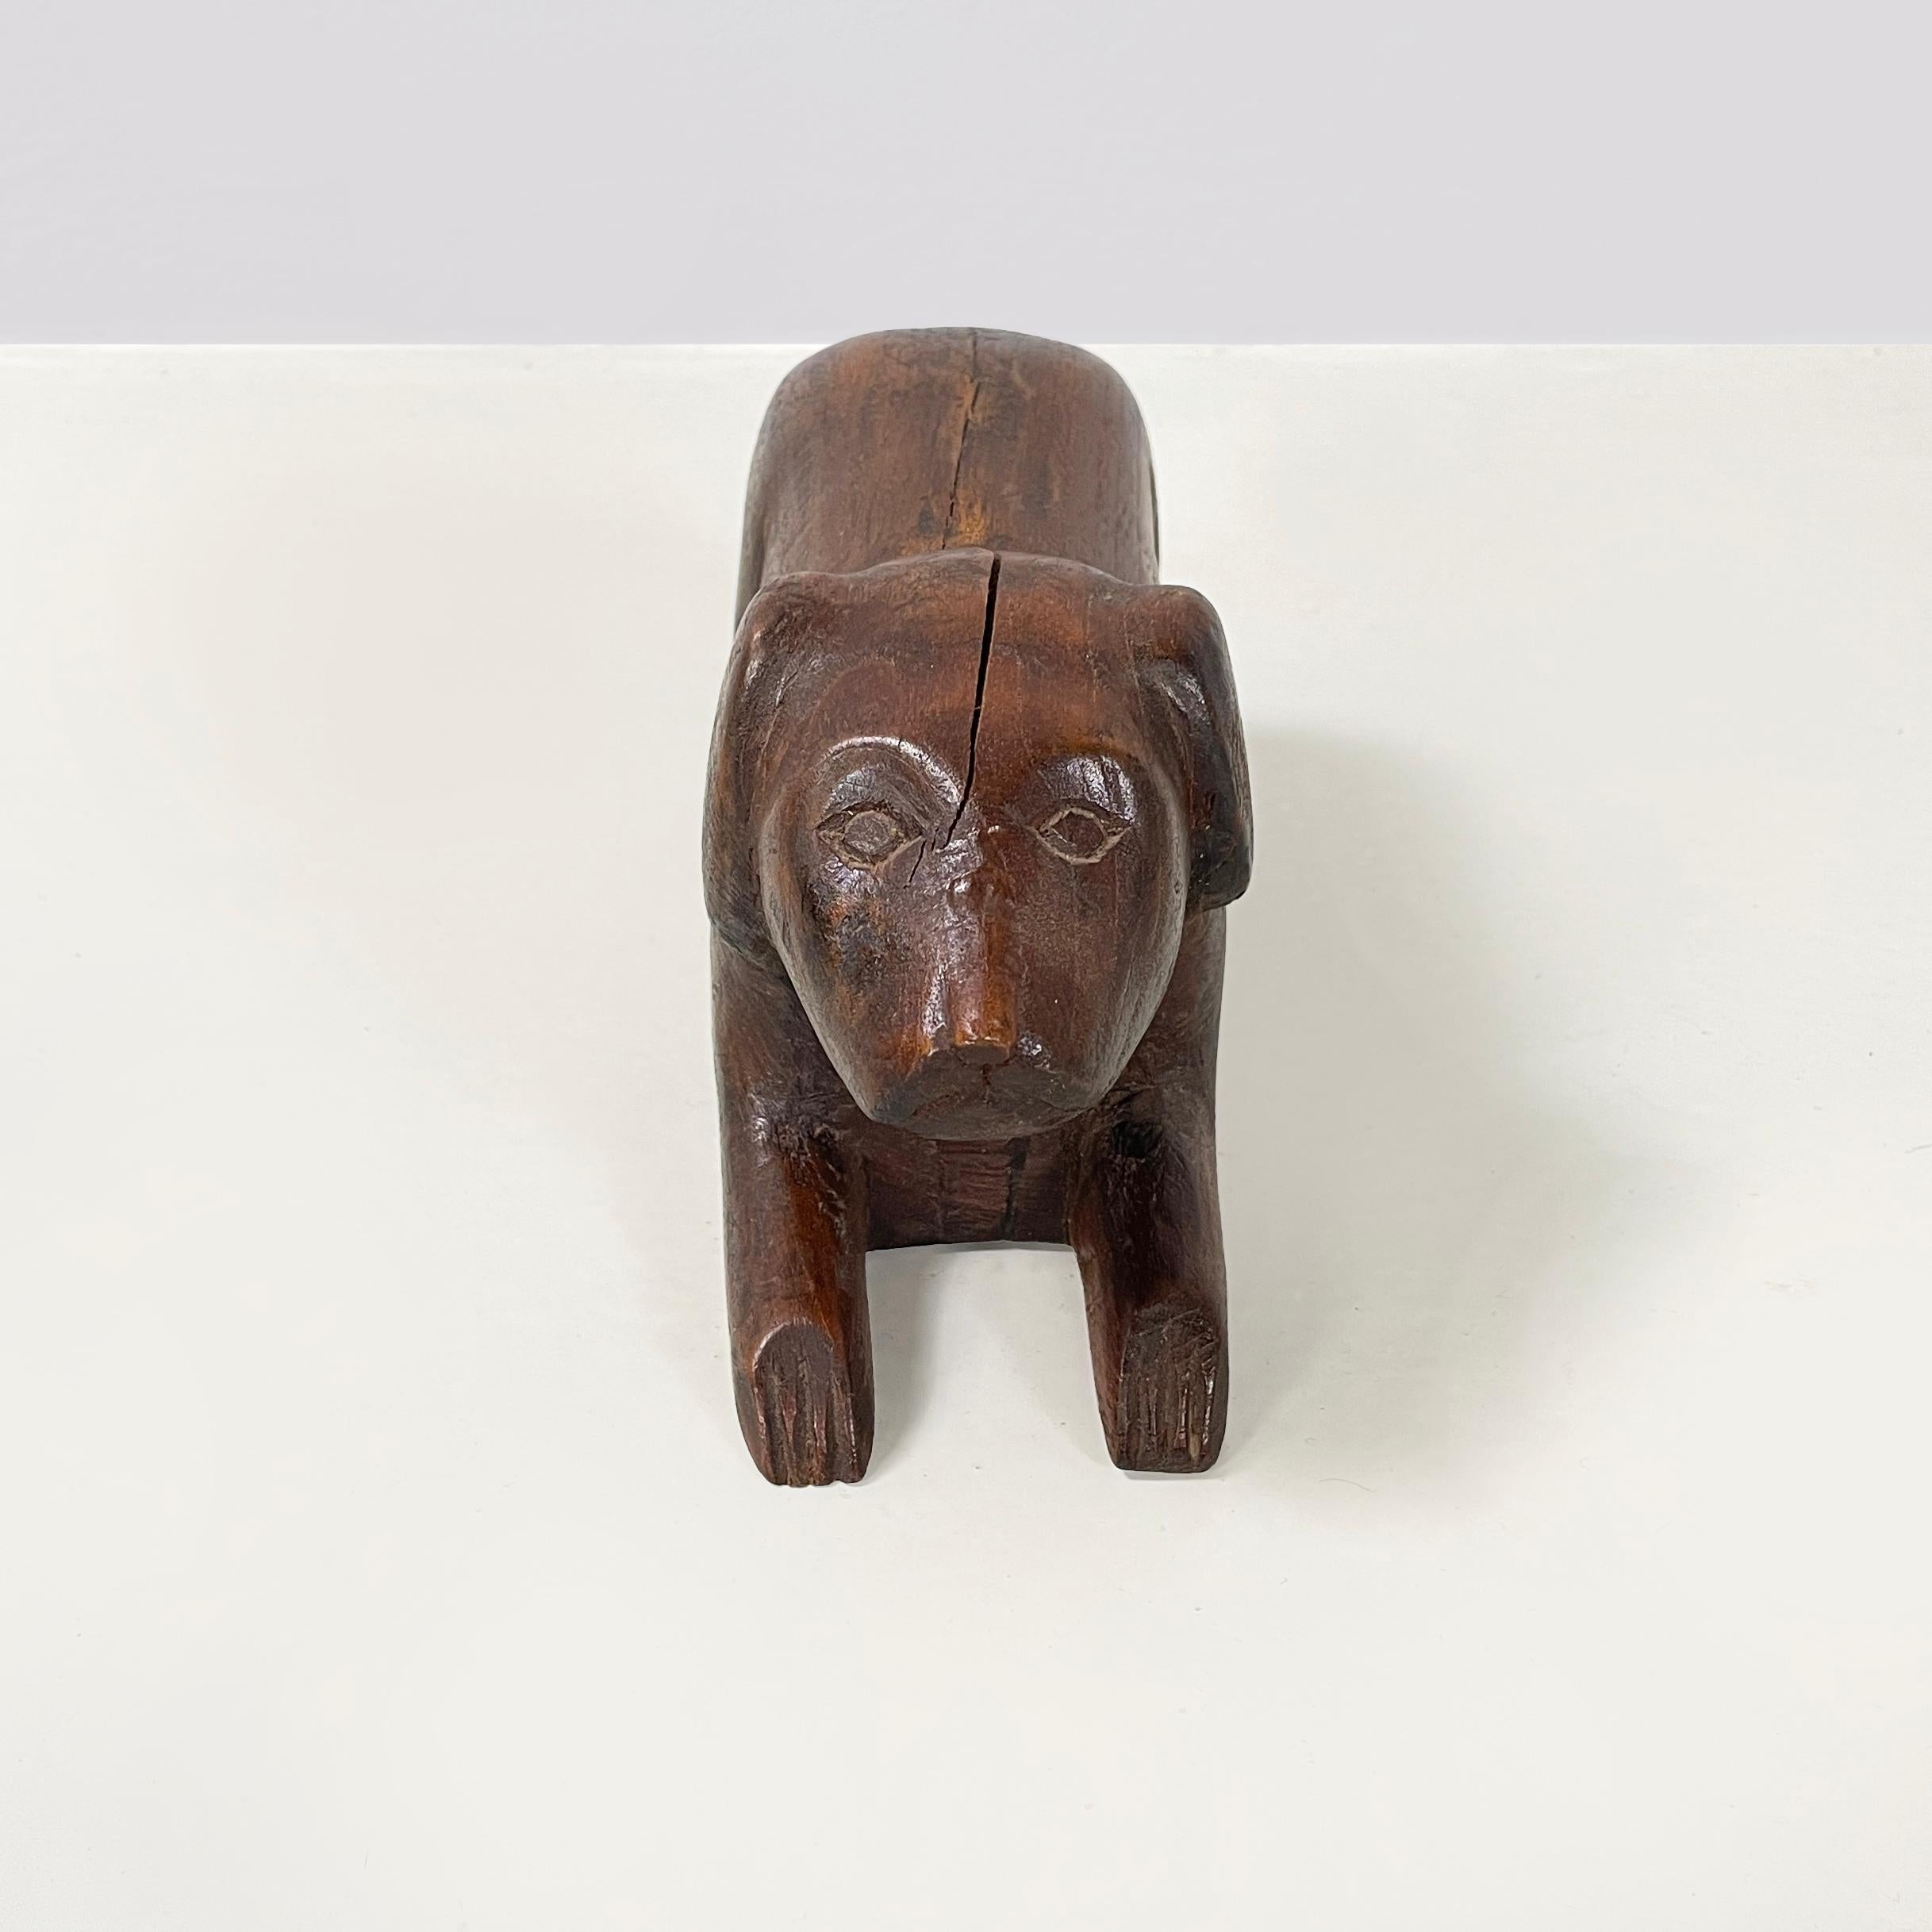 Chinese antique Wooden dog jewelry box or object holder, 1920s
Jewelry box with retractable compartment in the shape of a lying dog, entirely made of dark wood. The dog's features are stylized. The sliding compartment is on the dog's belly. When